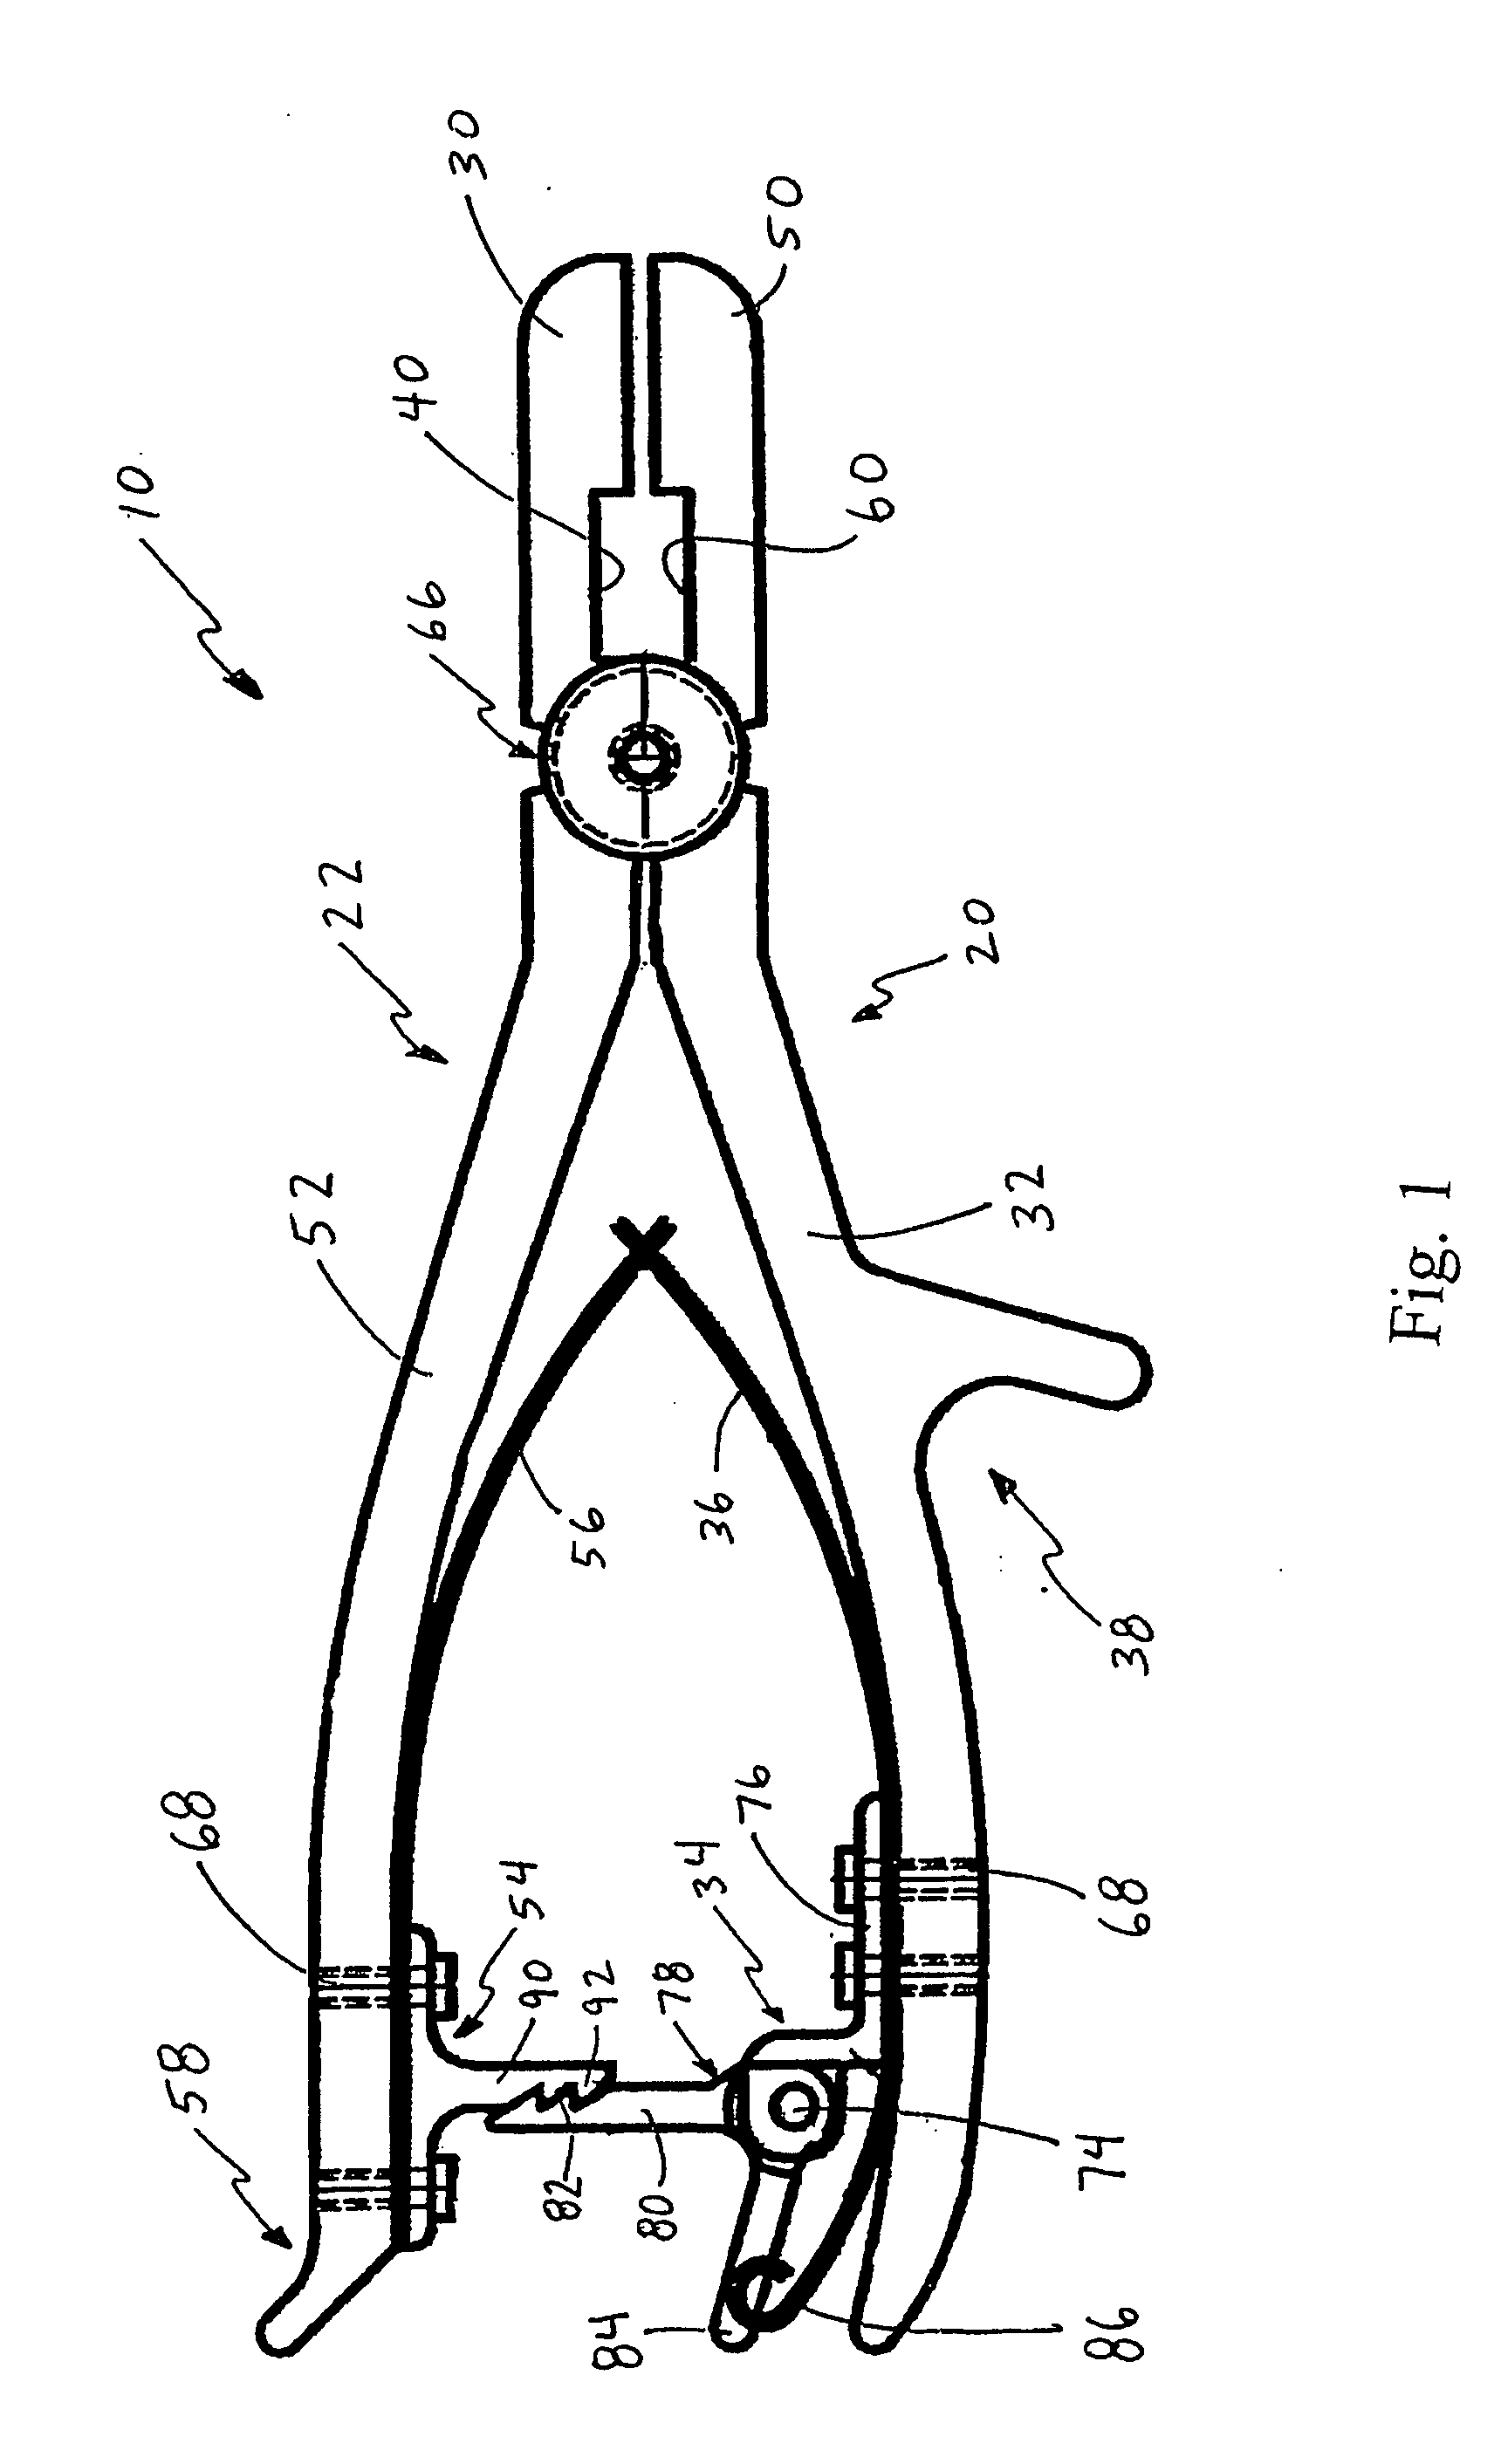 Surgical clamp and cutting blade